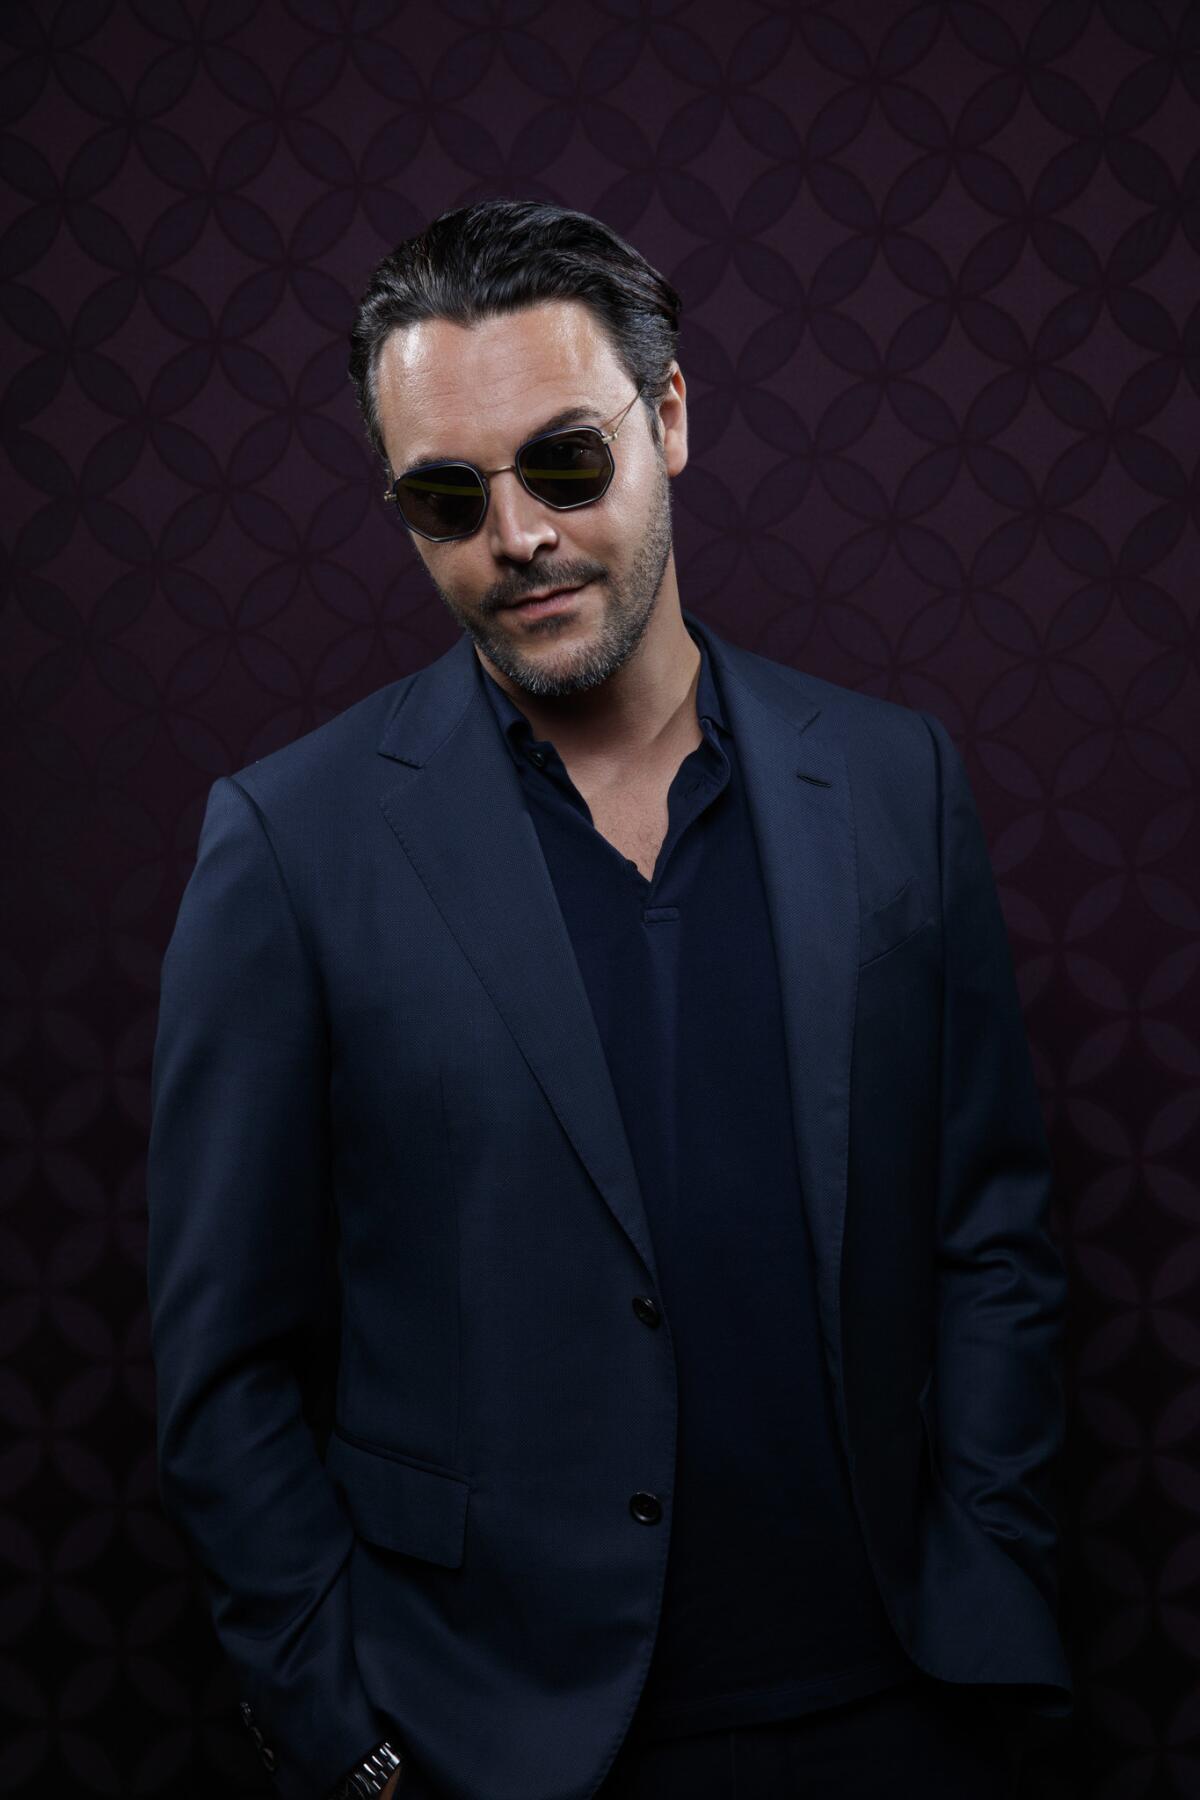 Jack Huston from the television series "Mr. Mercedes."